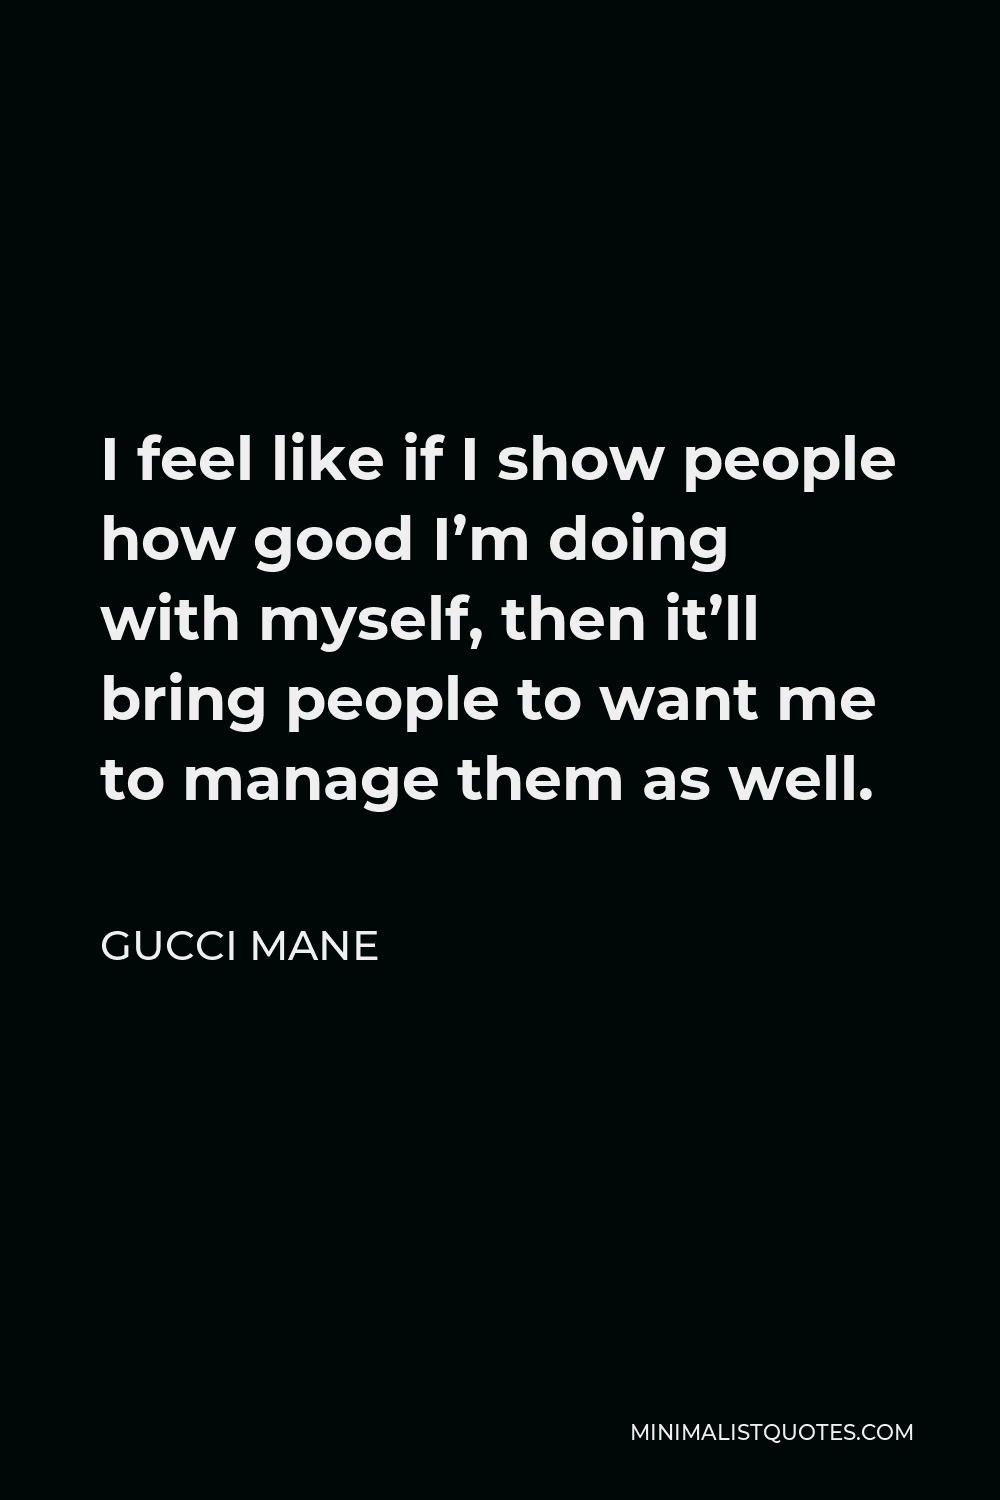 Gucci Mane Quote - I feel like if I show people how good I’m doing with myself, then it’ll bring people to want me to manage them as well.